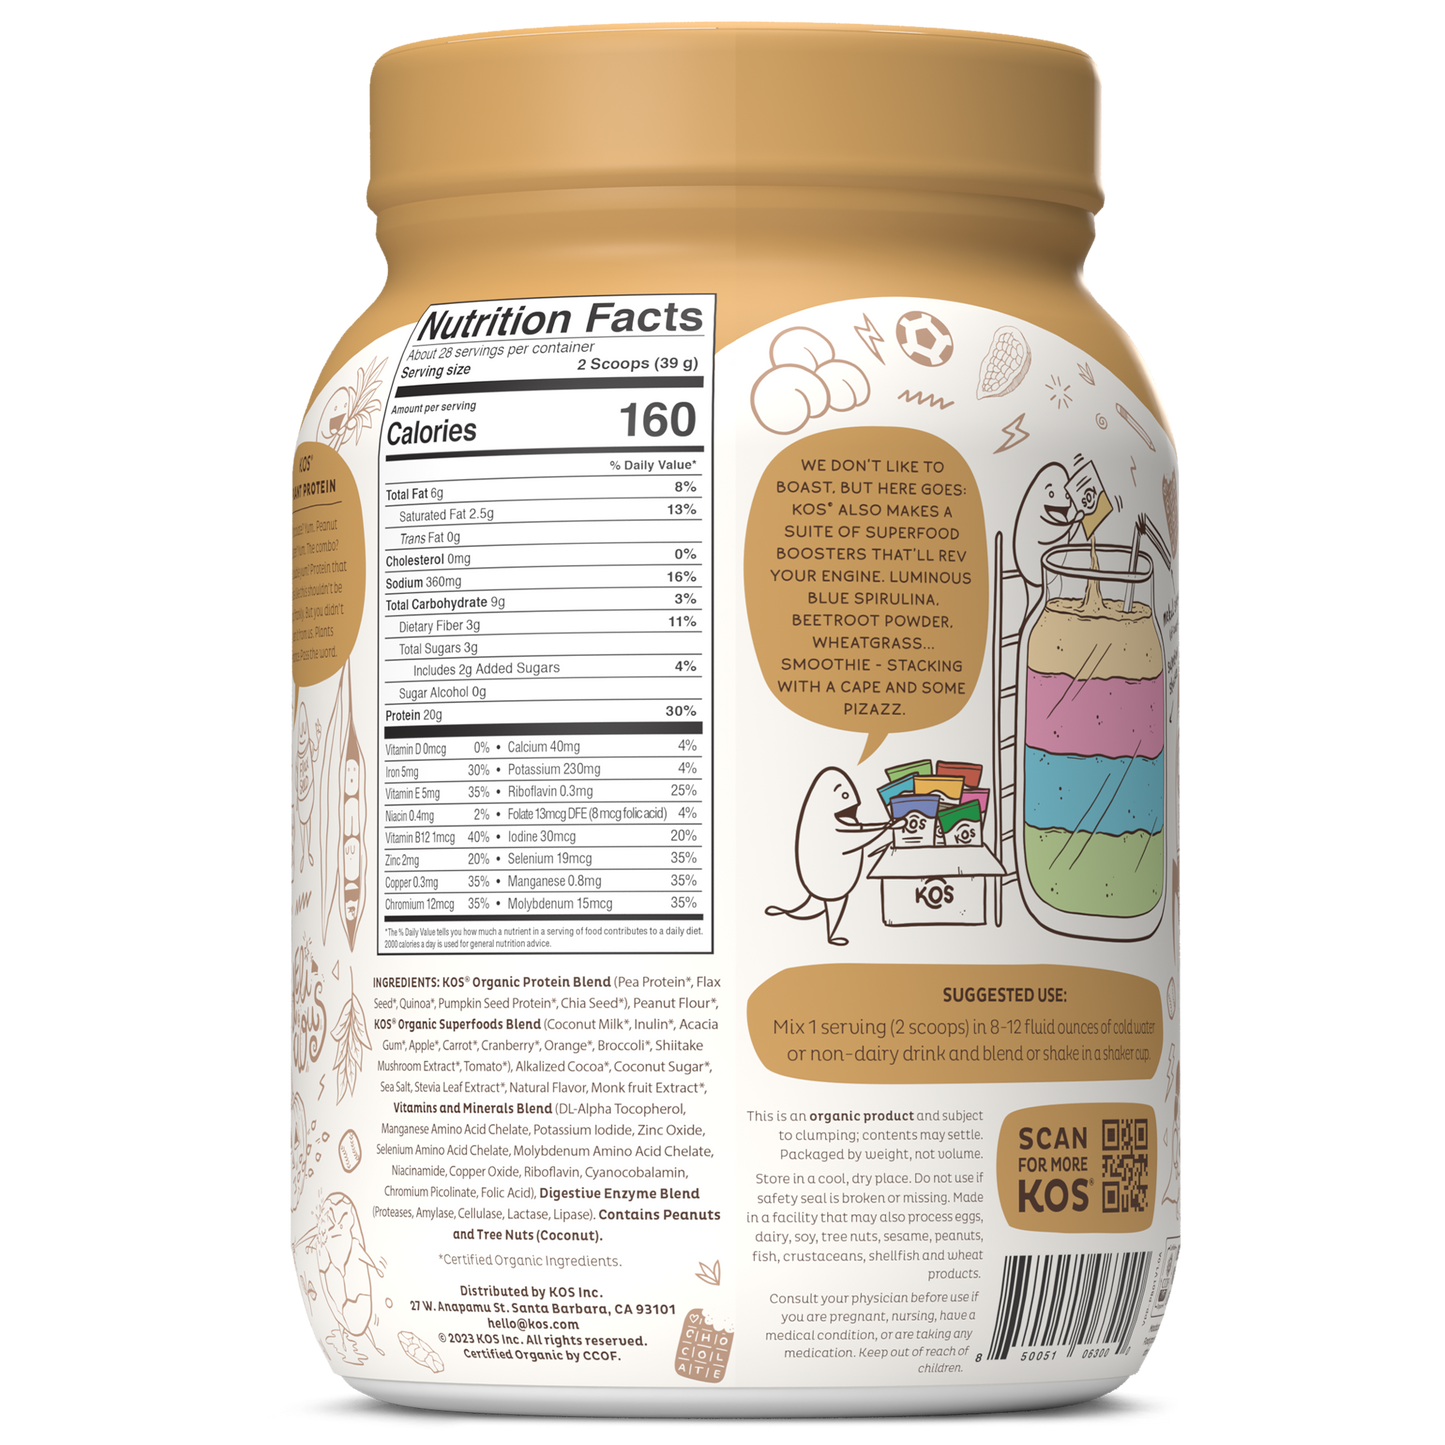 organic plant protein, chocolate peanut butter, 28 servings by kos